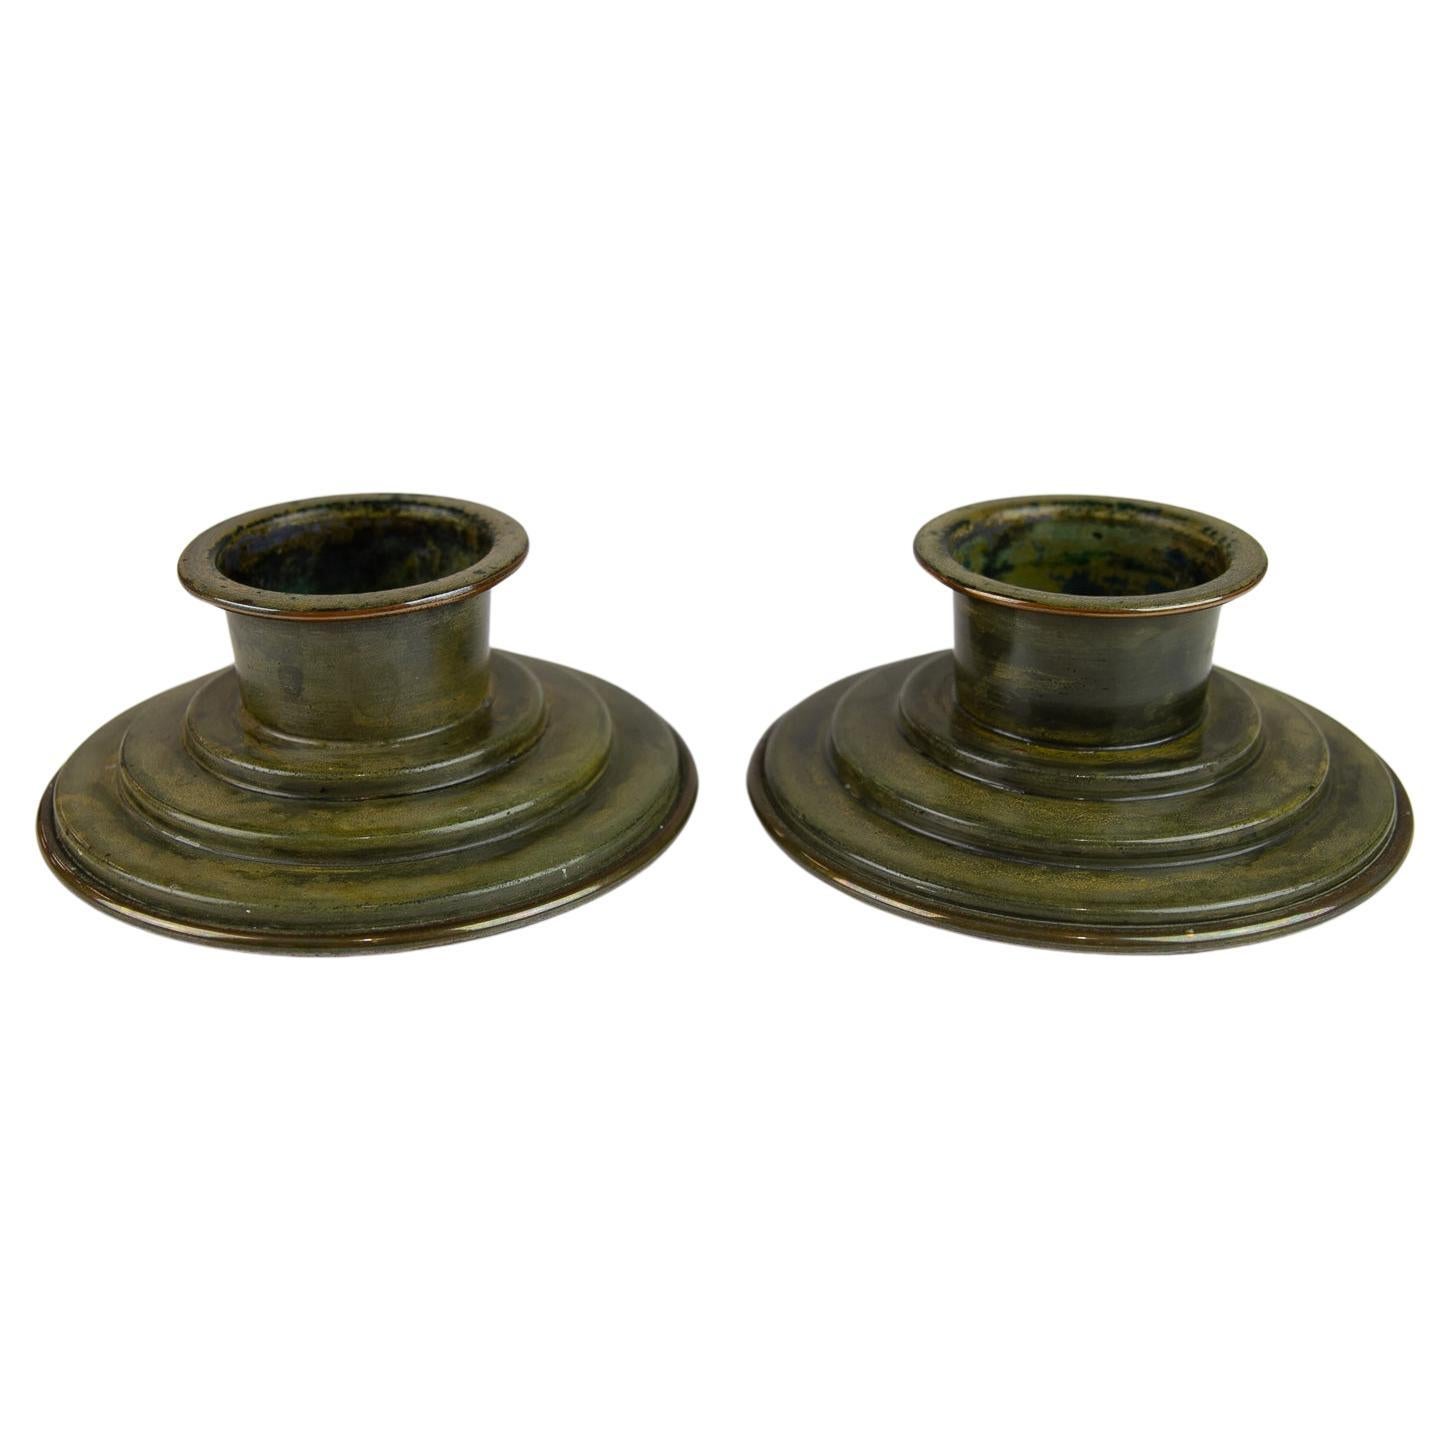 Danish Art Deco Bronze Candleholders by HF Bronce, 1930s. For Sale